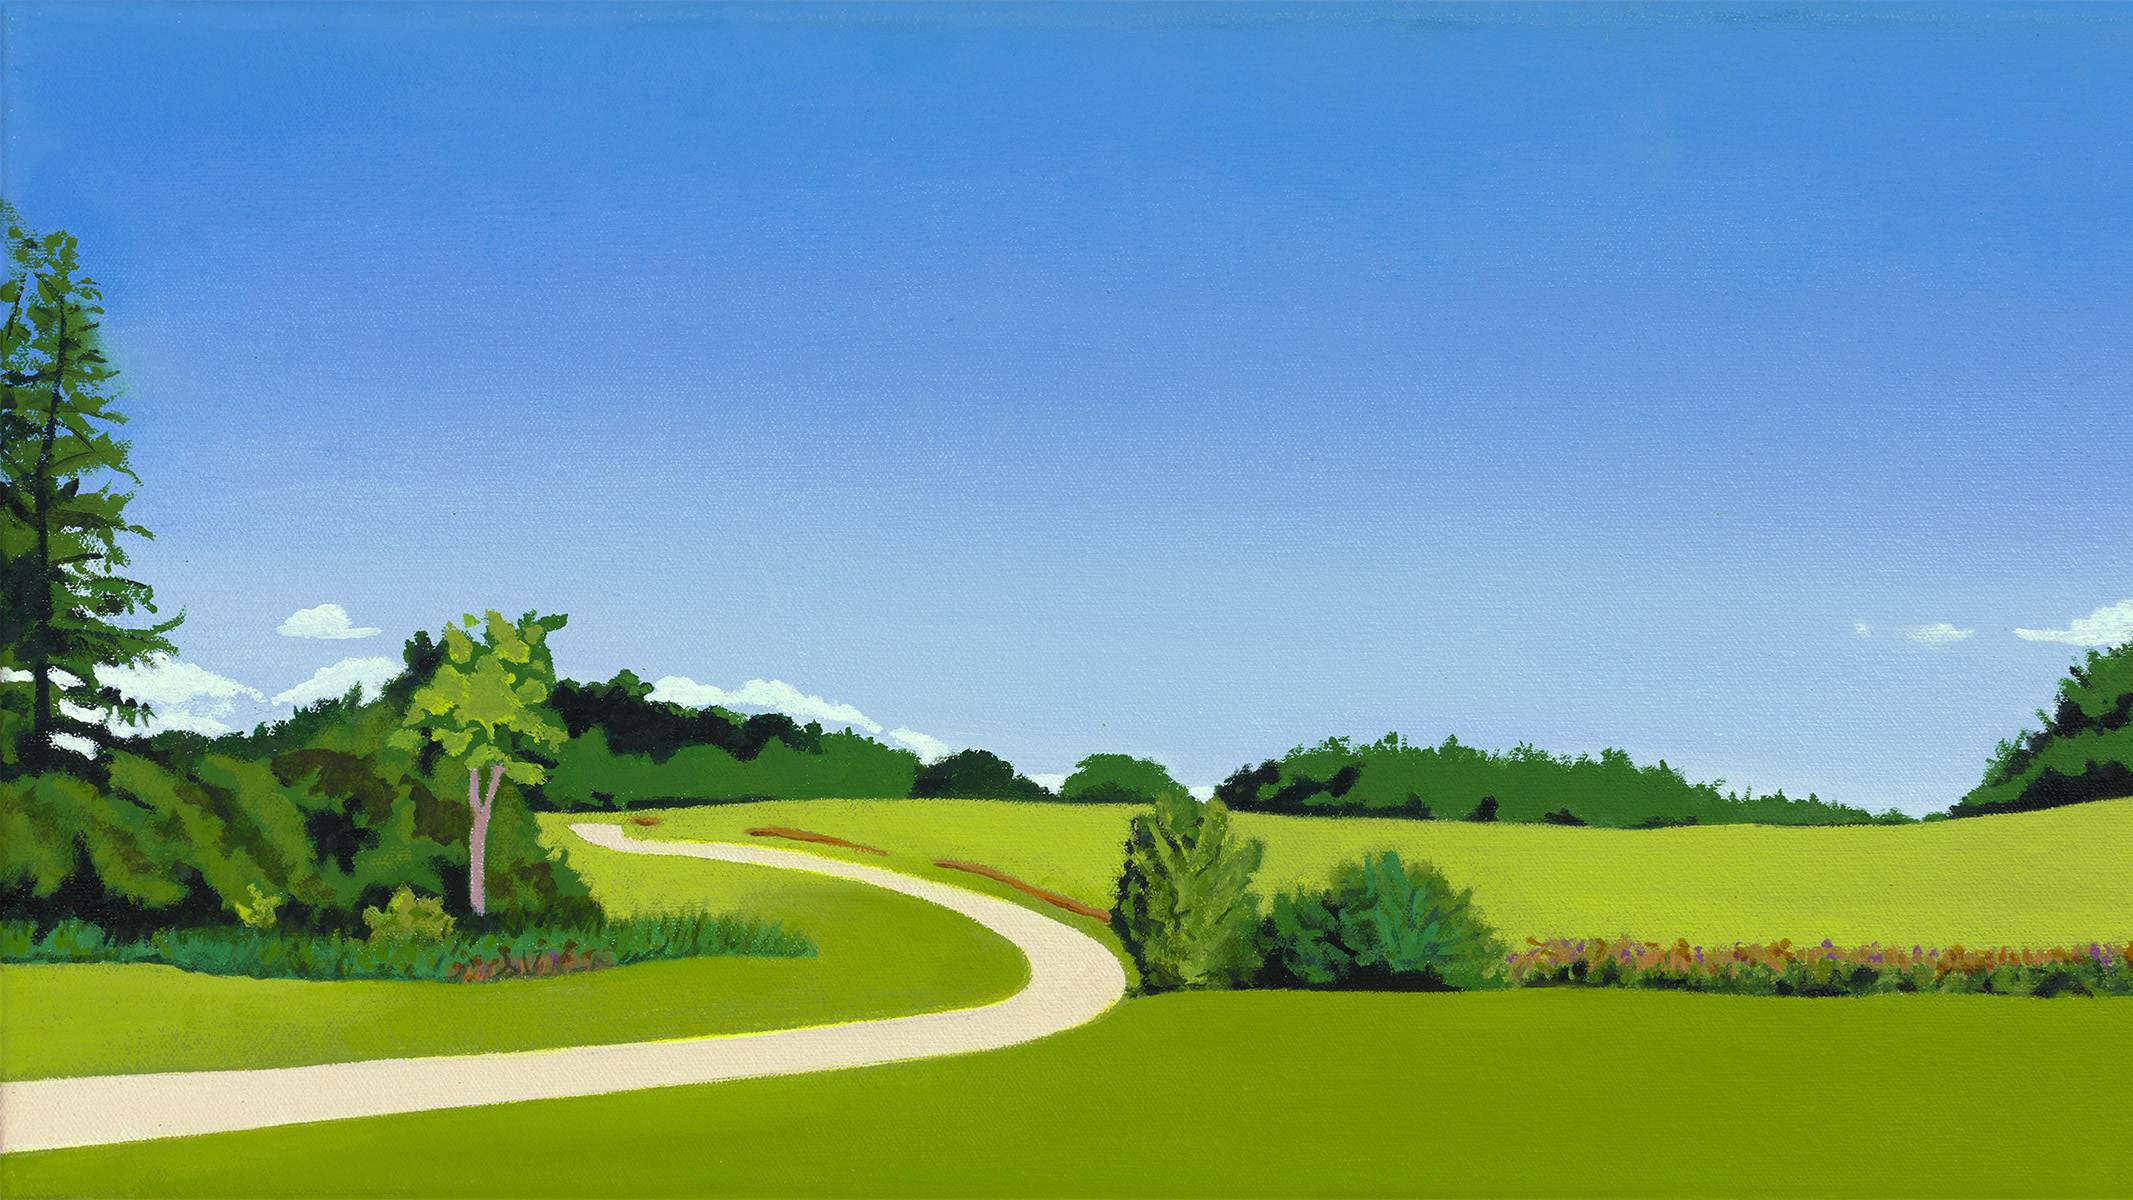 A painting of a beige road running through vibrantly green meadows and gently rolling hills dotted with trees, with a blue sky above